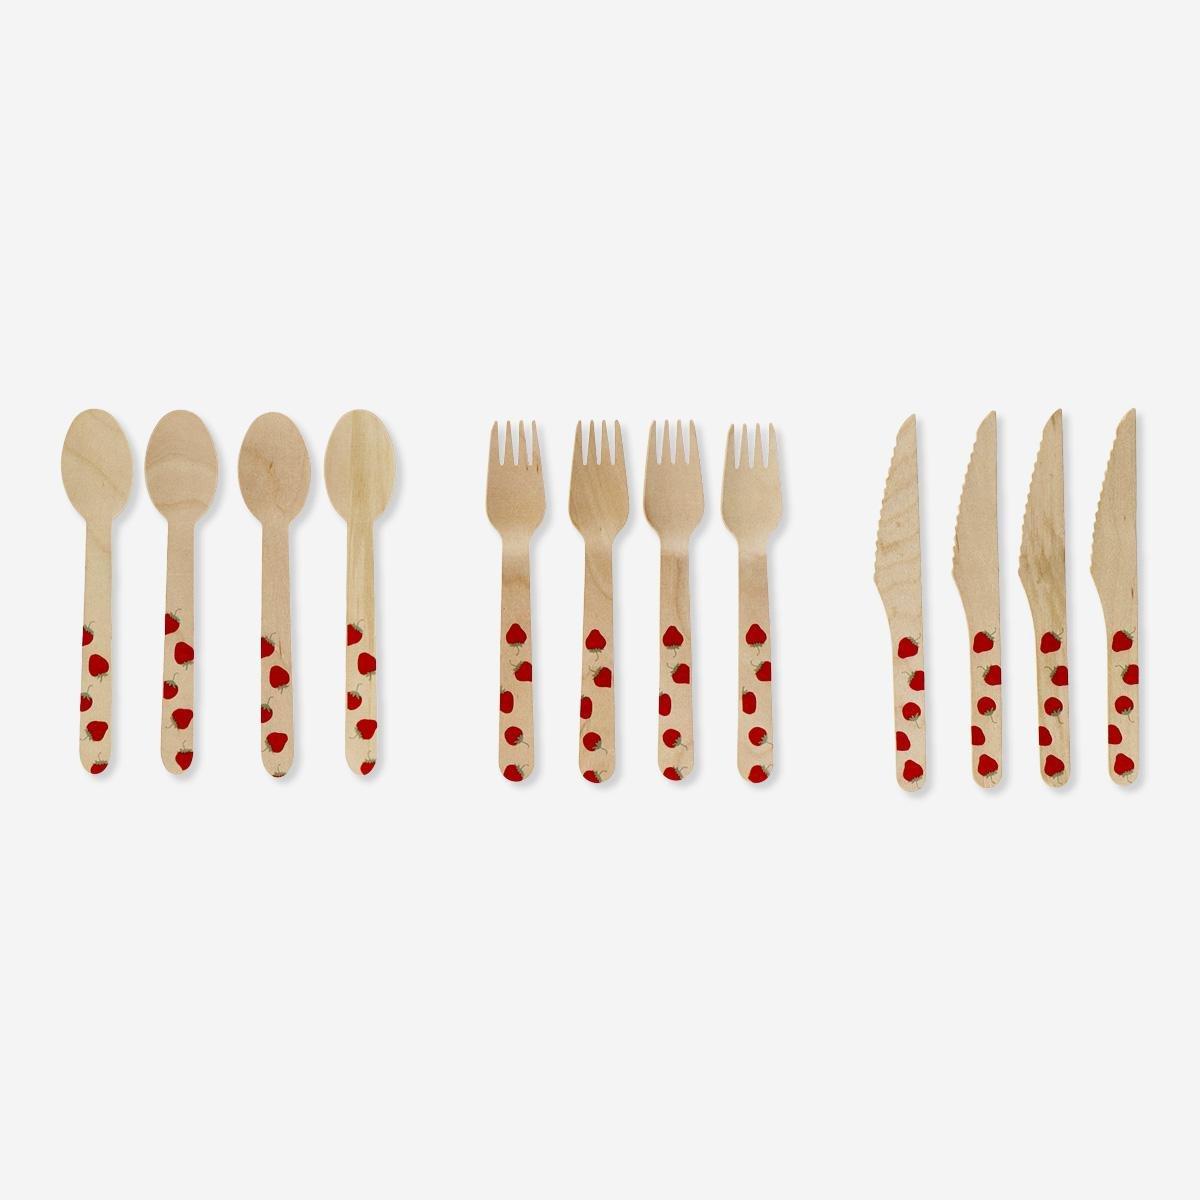 Multicolour wooden cutlery for 4 people